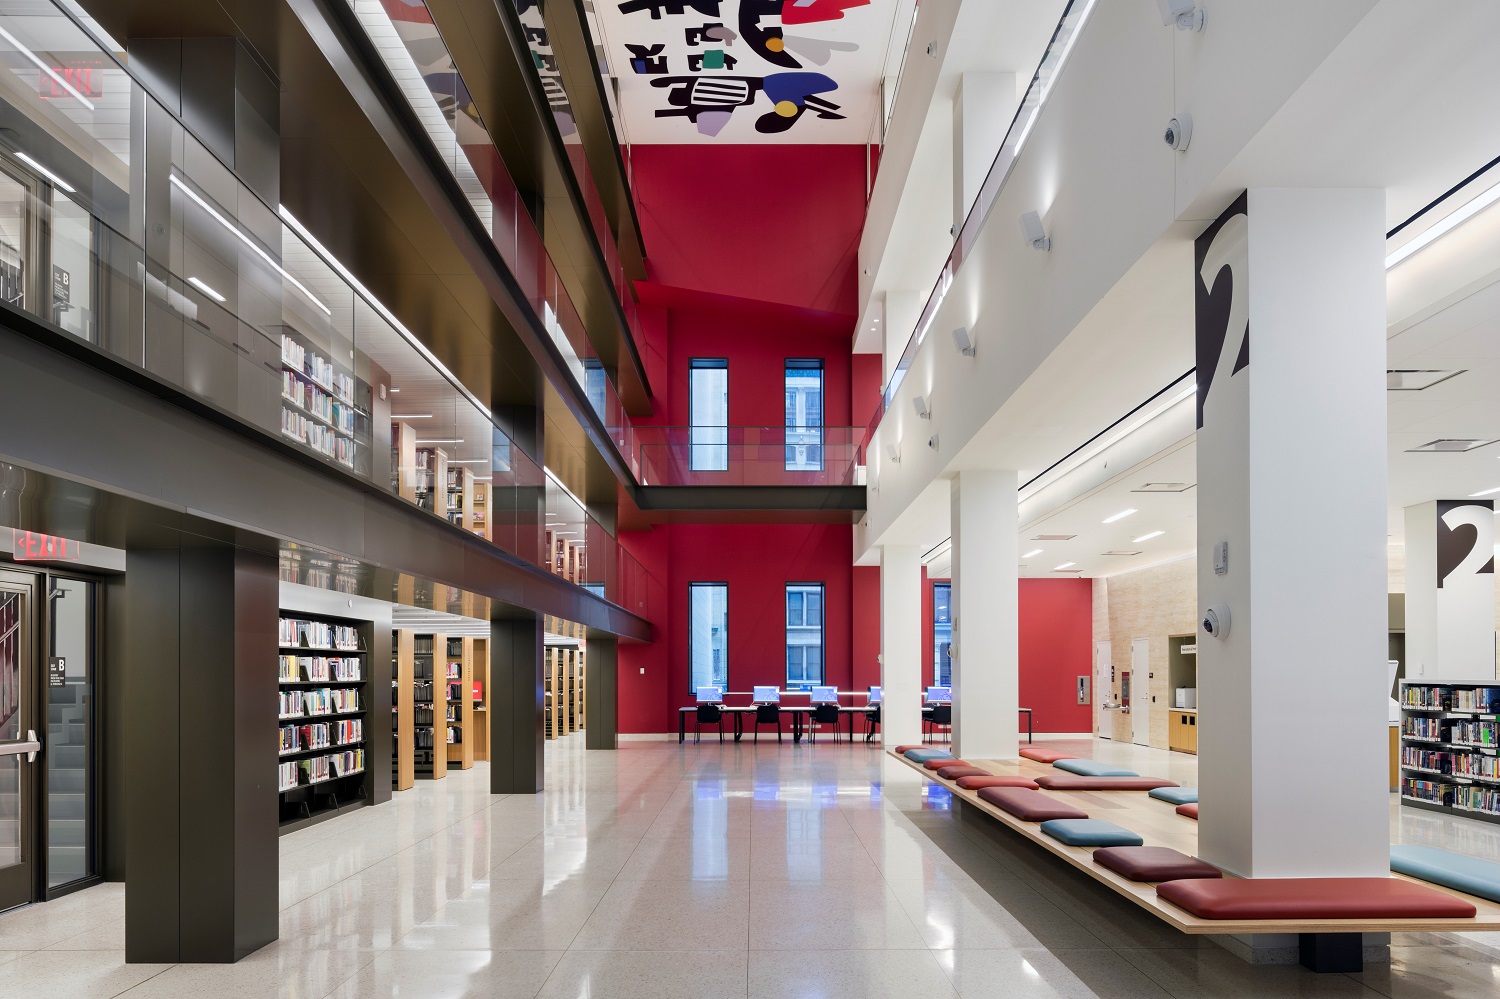 This is an interior image of the Stavros Niarchos Foundation Library